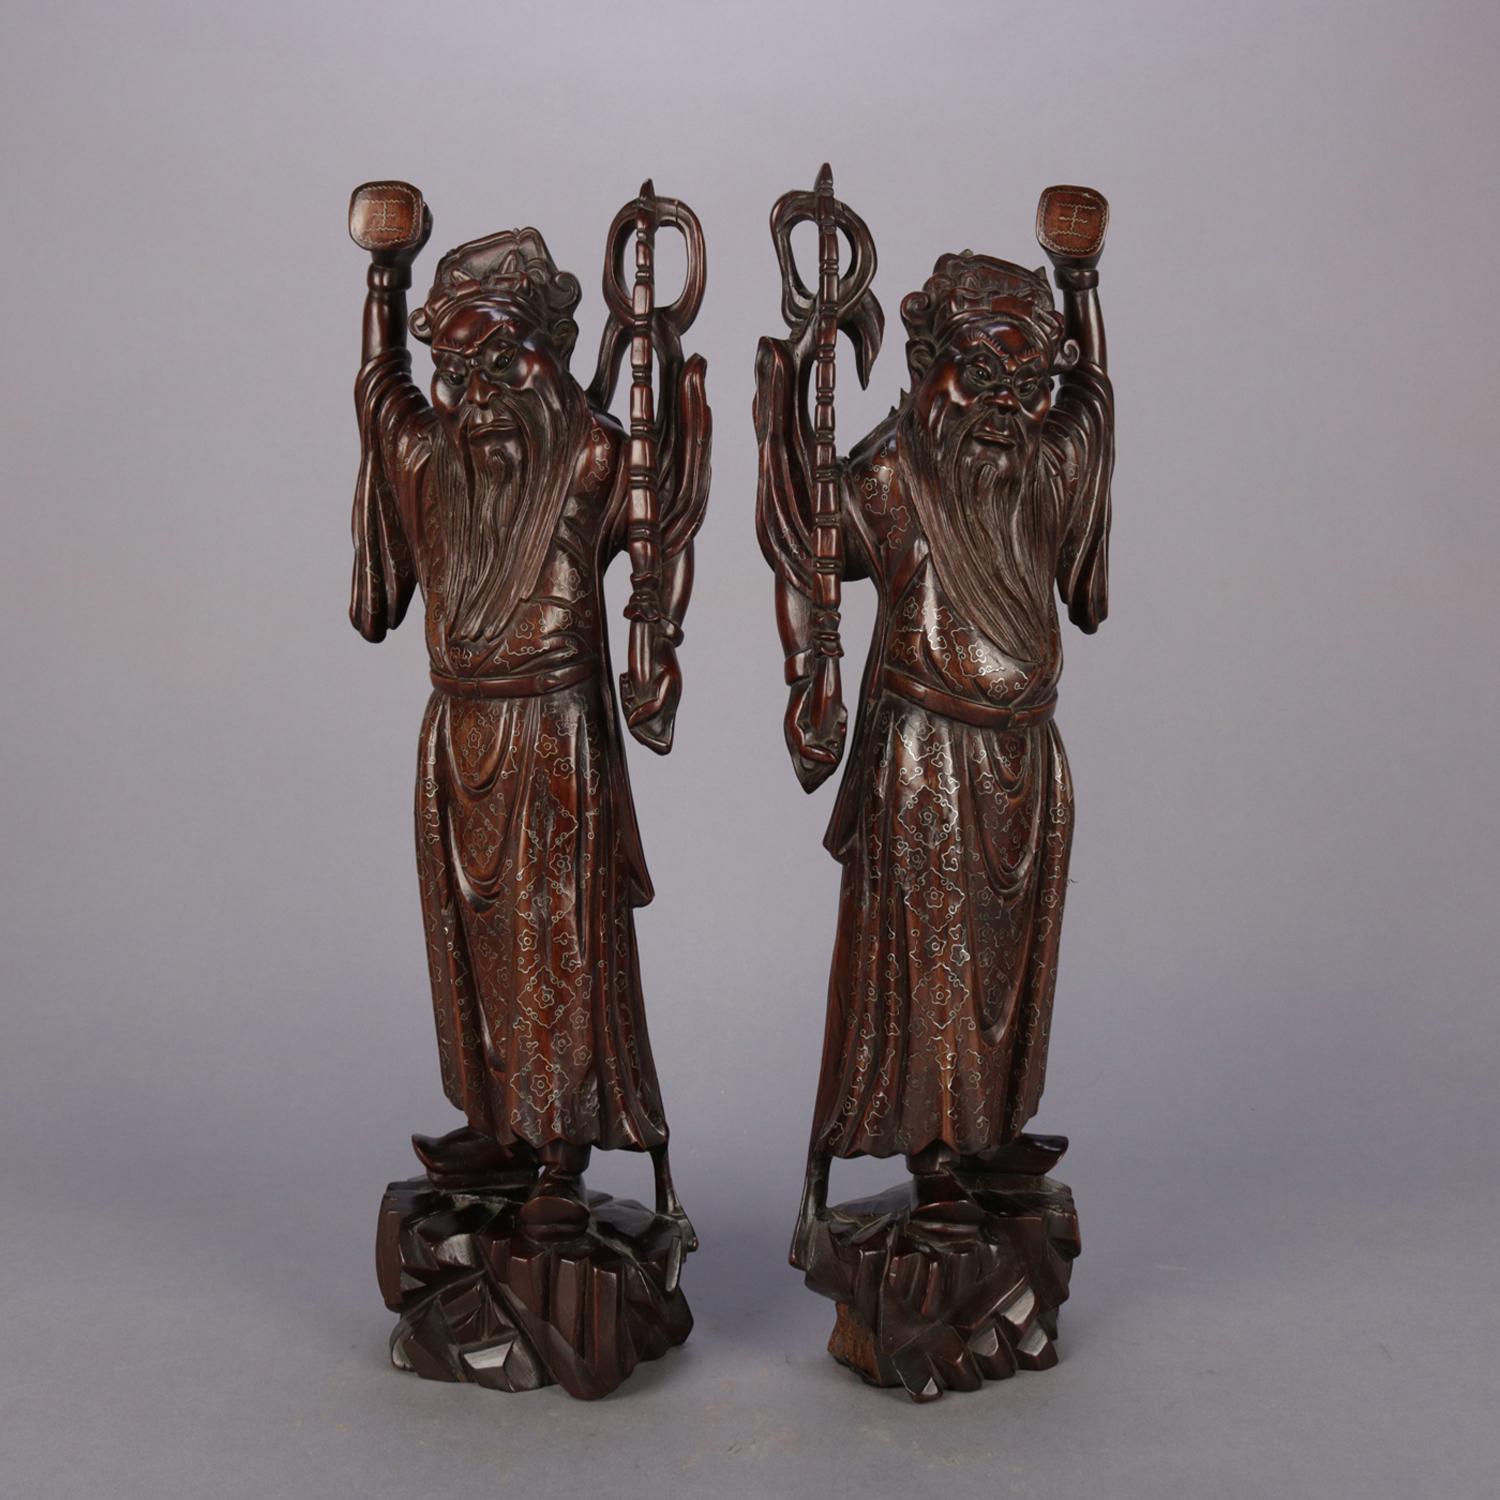 Hand-Carved Antique Japanese Hand Carved Hardwood Figures with Cloud Band Metalwork